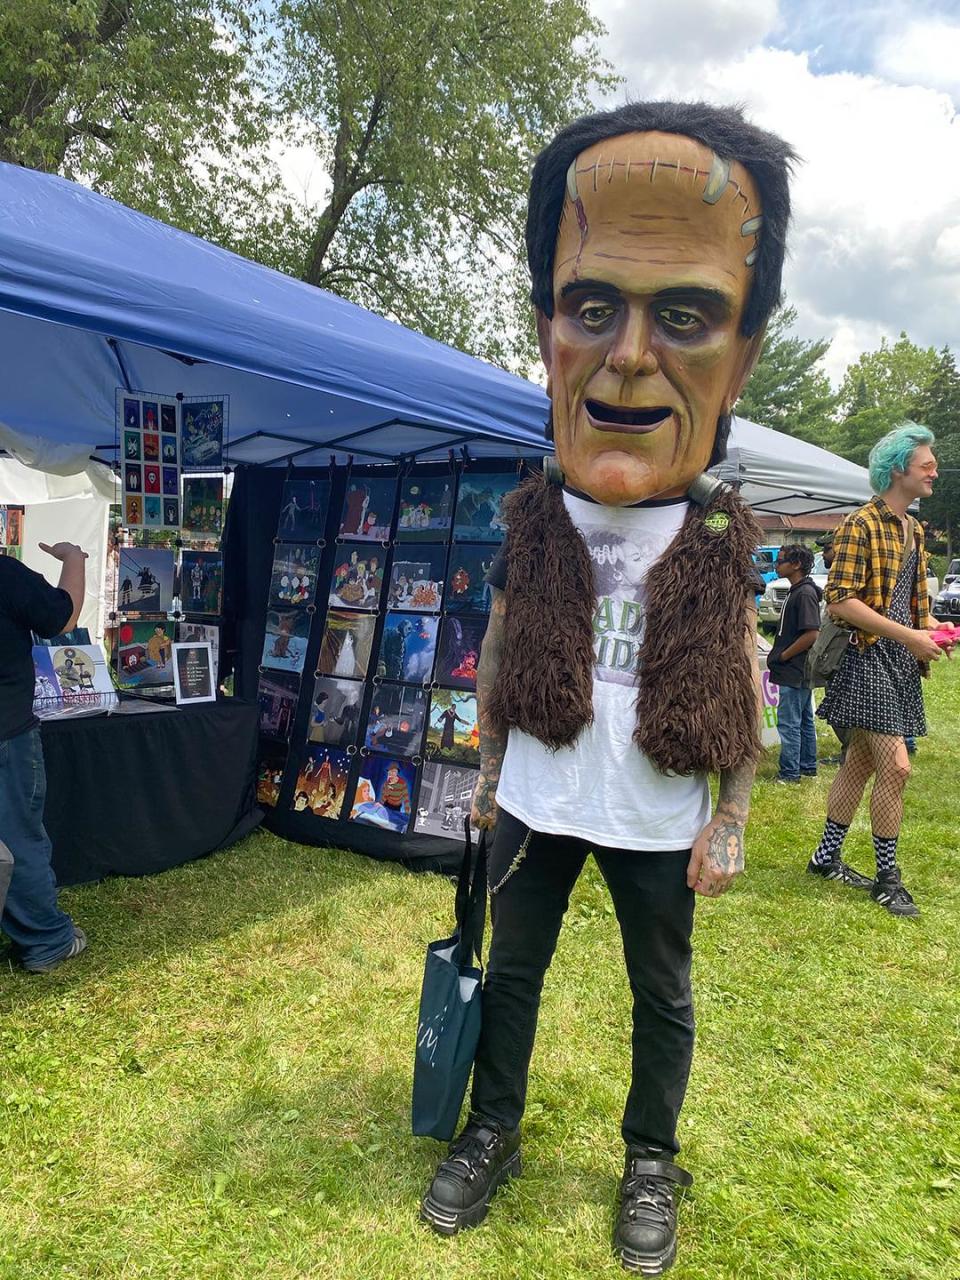 An attendee is decked out in Frankenstein gear for FrankenFest.